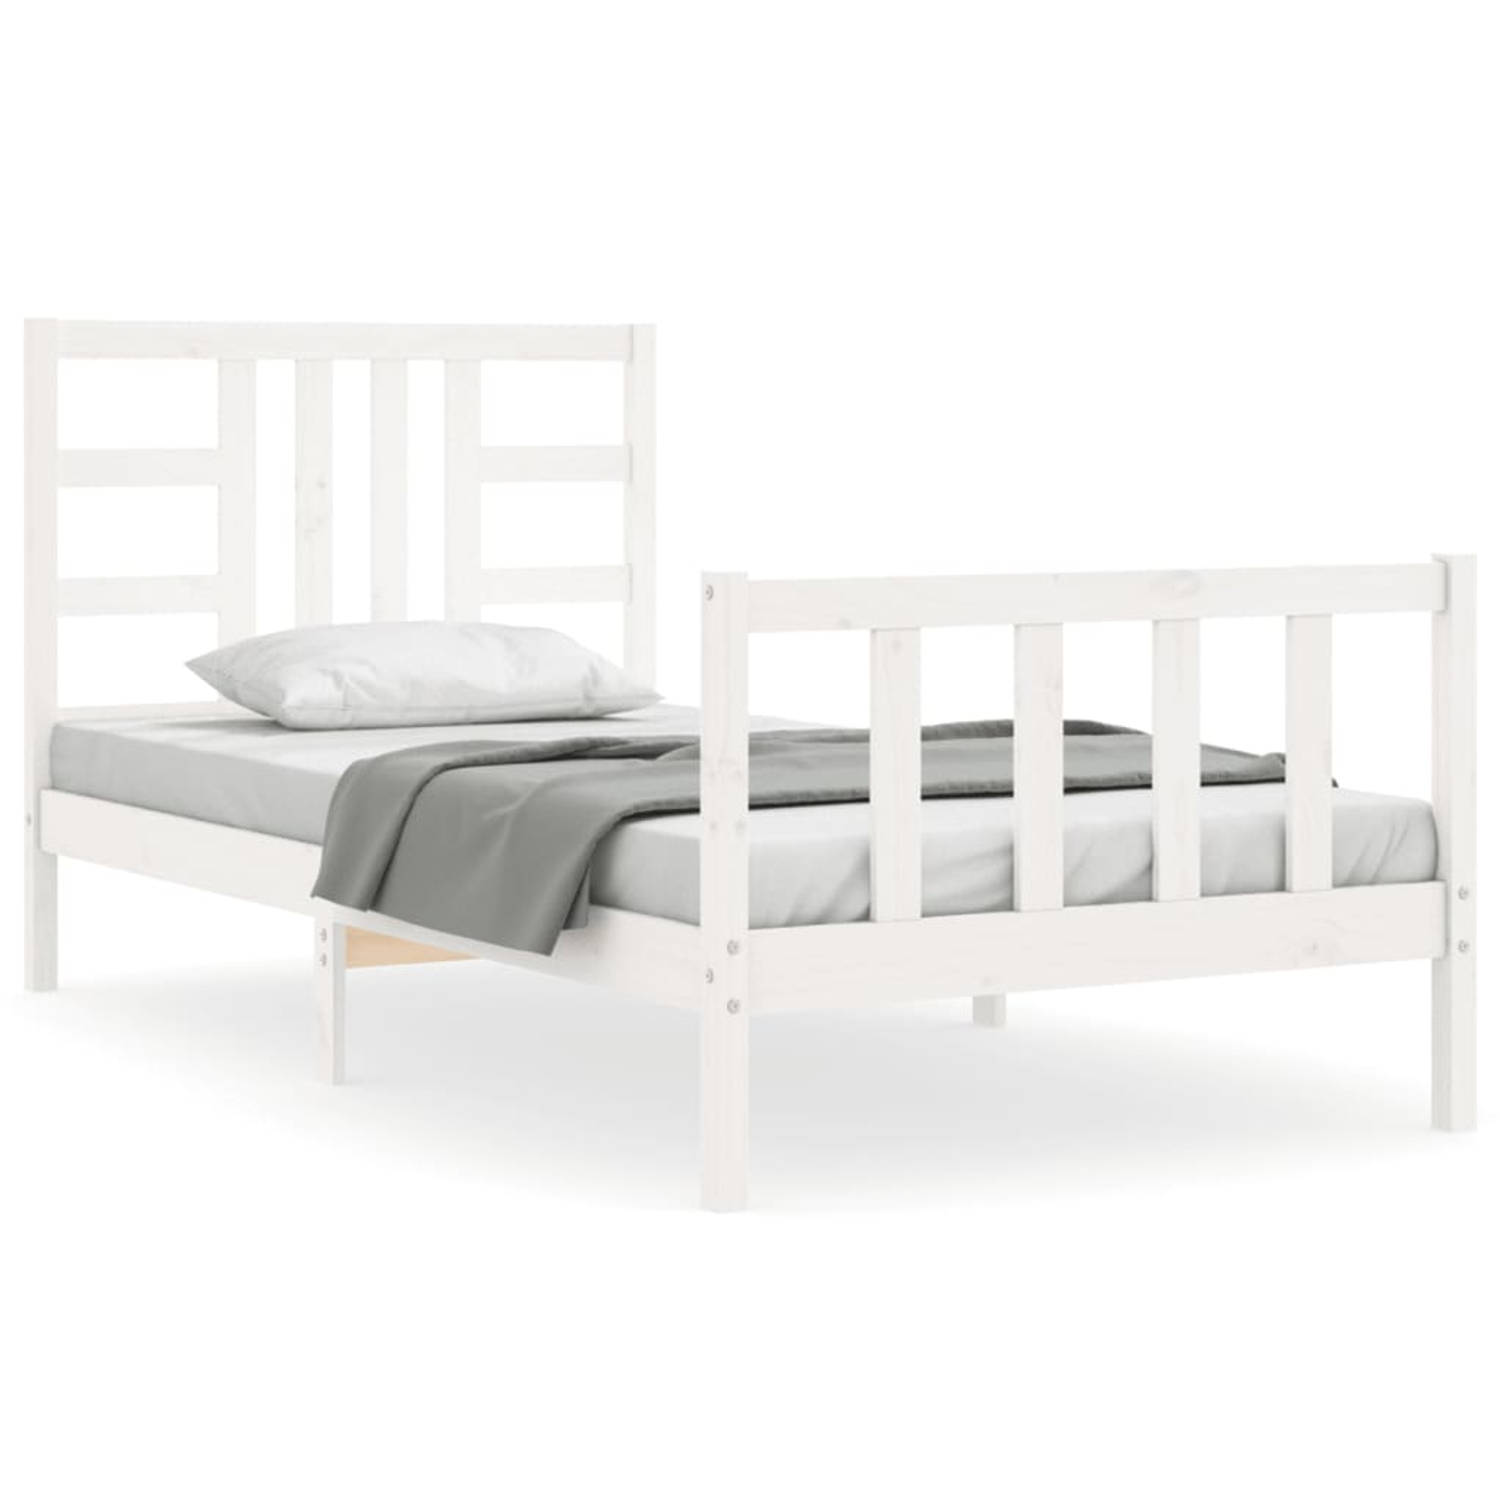 The Living Store Bedframe - Massief grenenhout - 205.5 x 105.5 x 100 cm - Wit